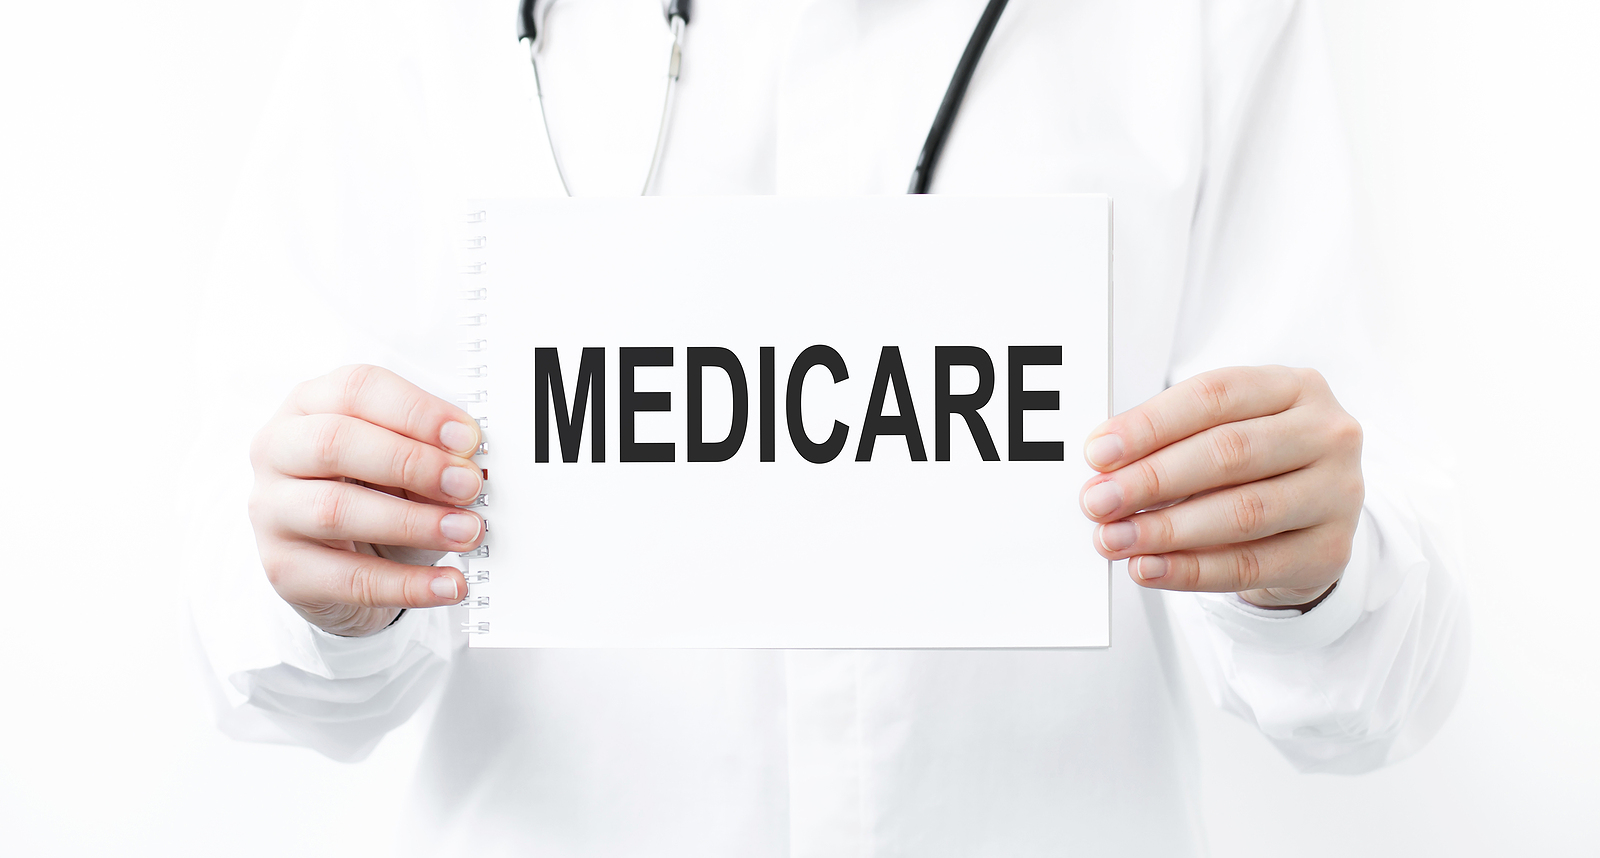 Why does the MSP industry use the phrase “consider and protect” when discussing Medicare’s interest?